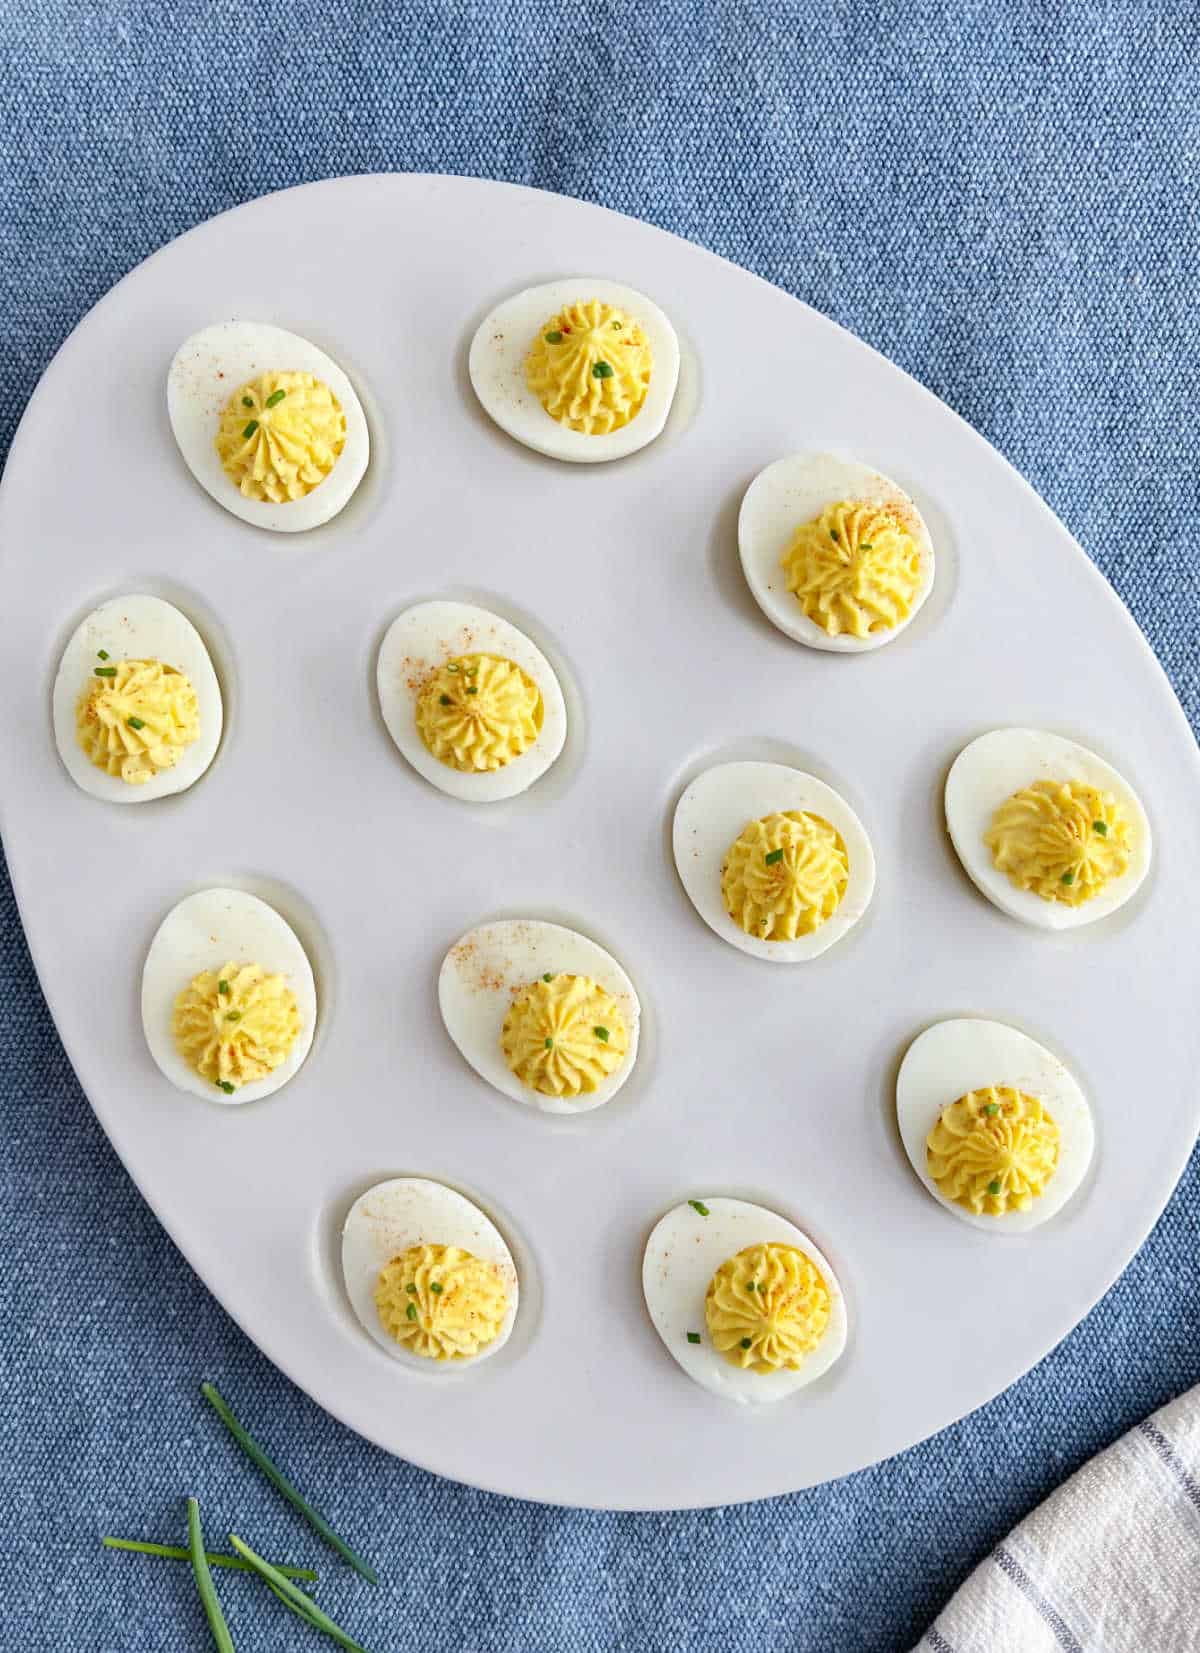 classic deviled eggs with chives and paprika in egg shaped platter.